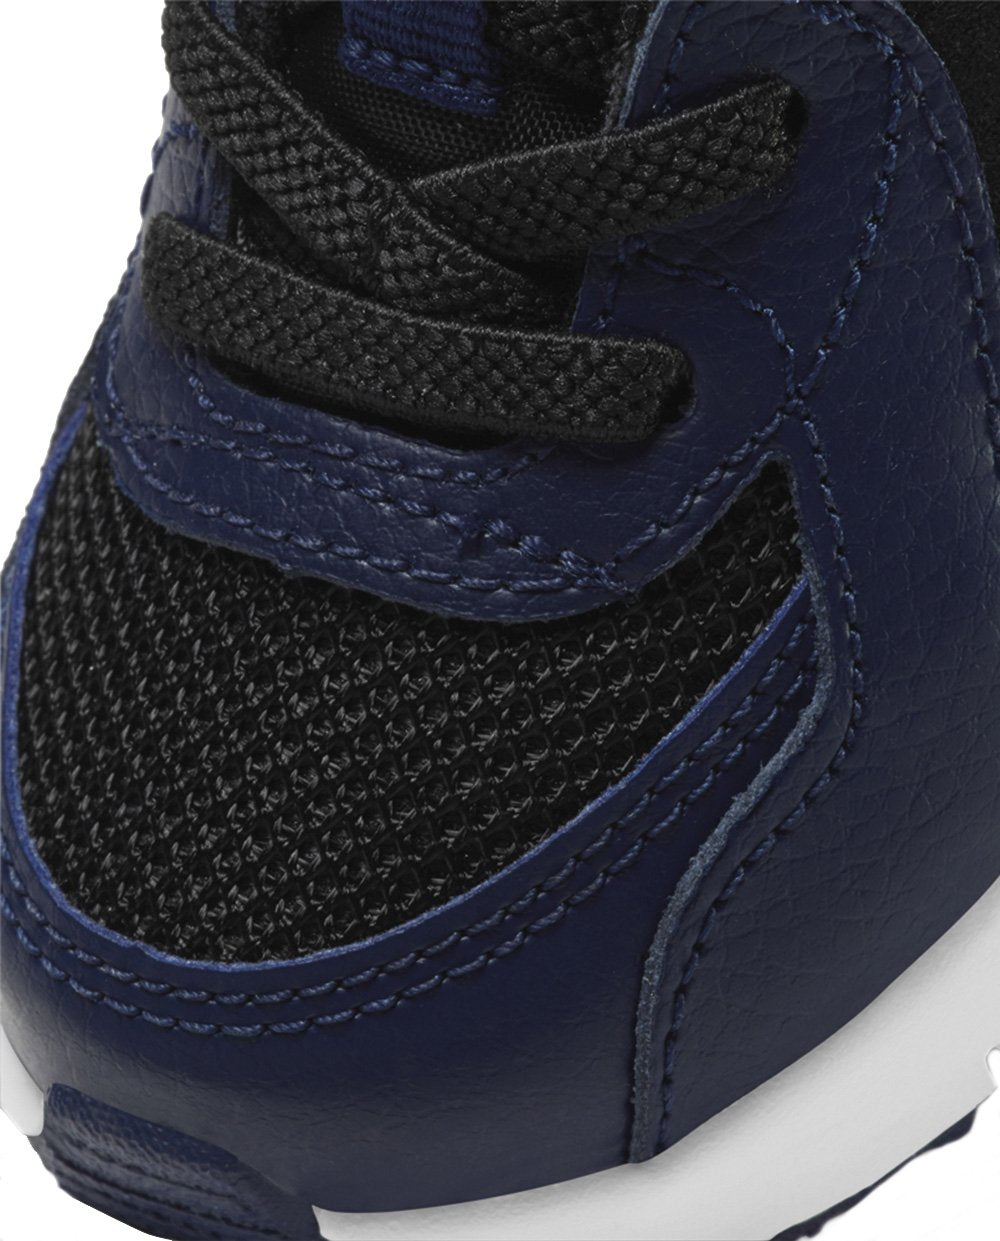 Nike Air Max Excee Black and Navy Blue